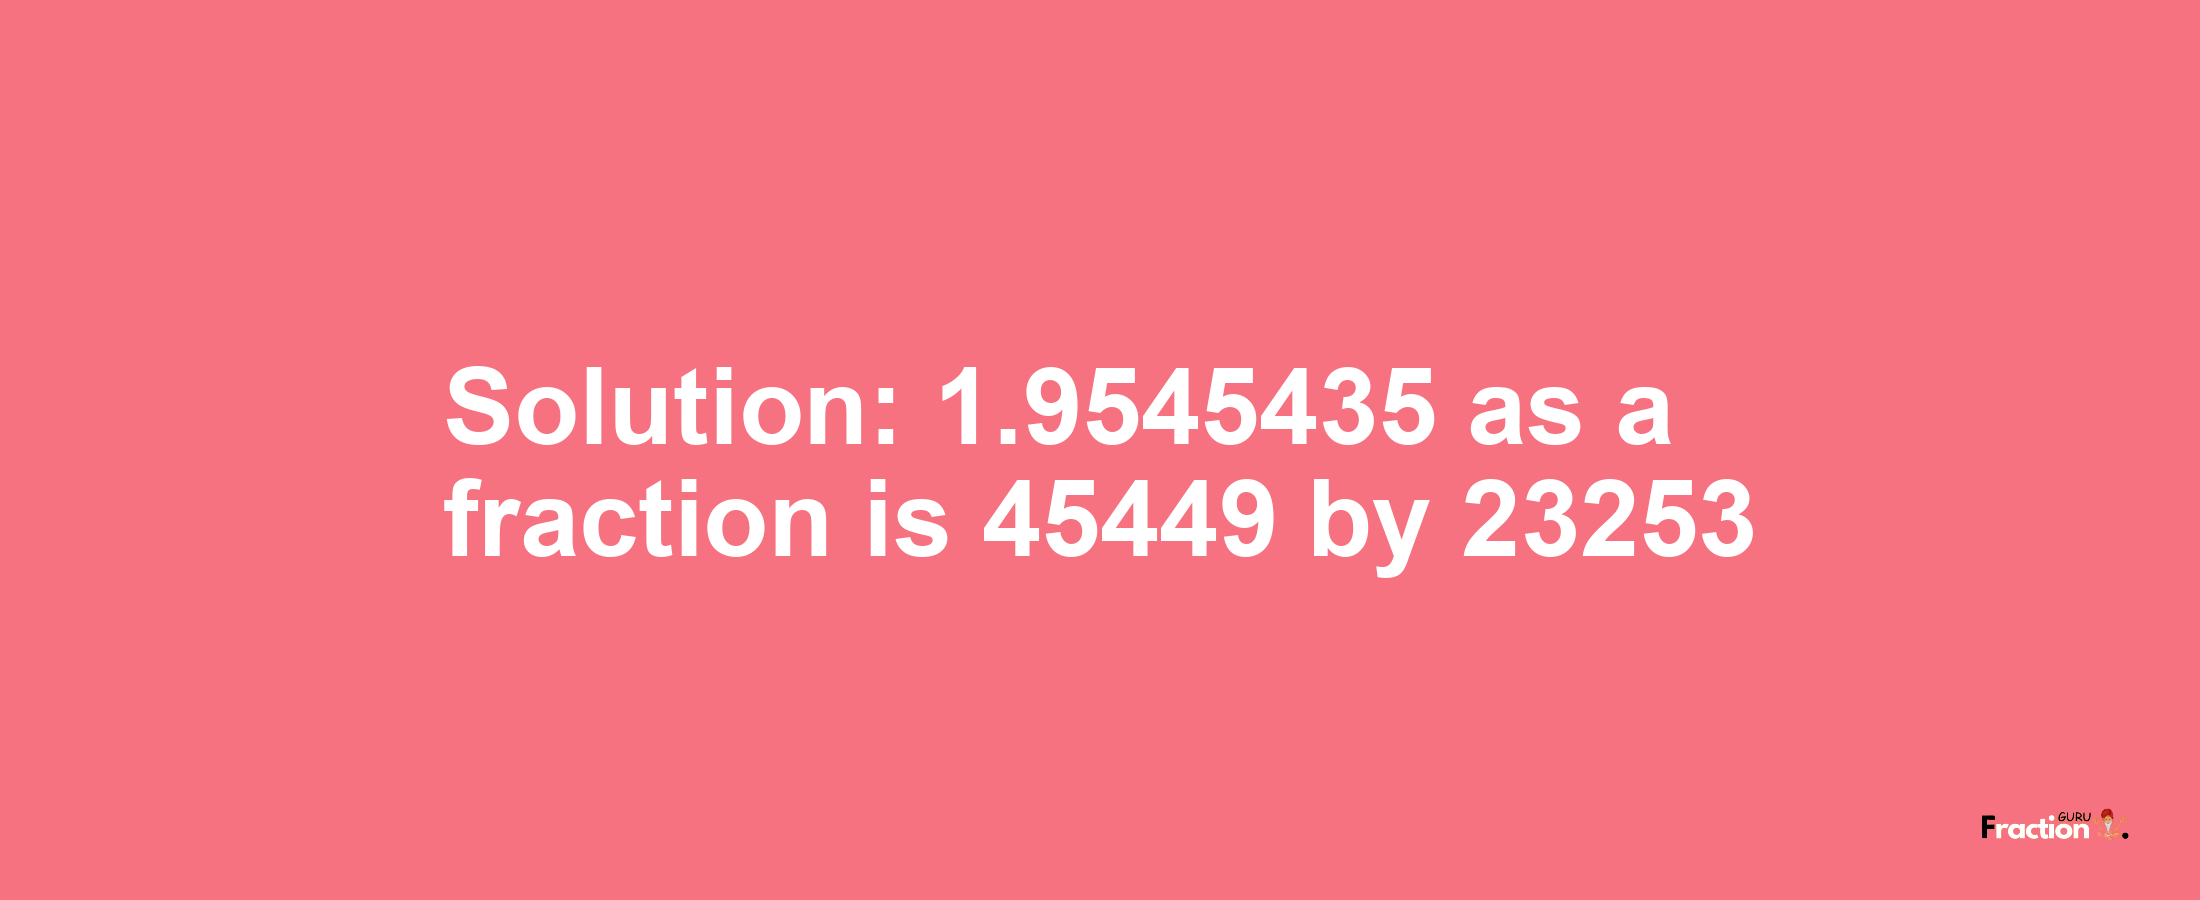 Solution:1.9545435 as a fraction is 45449/23253